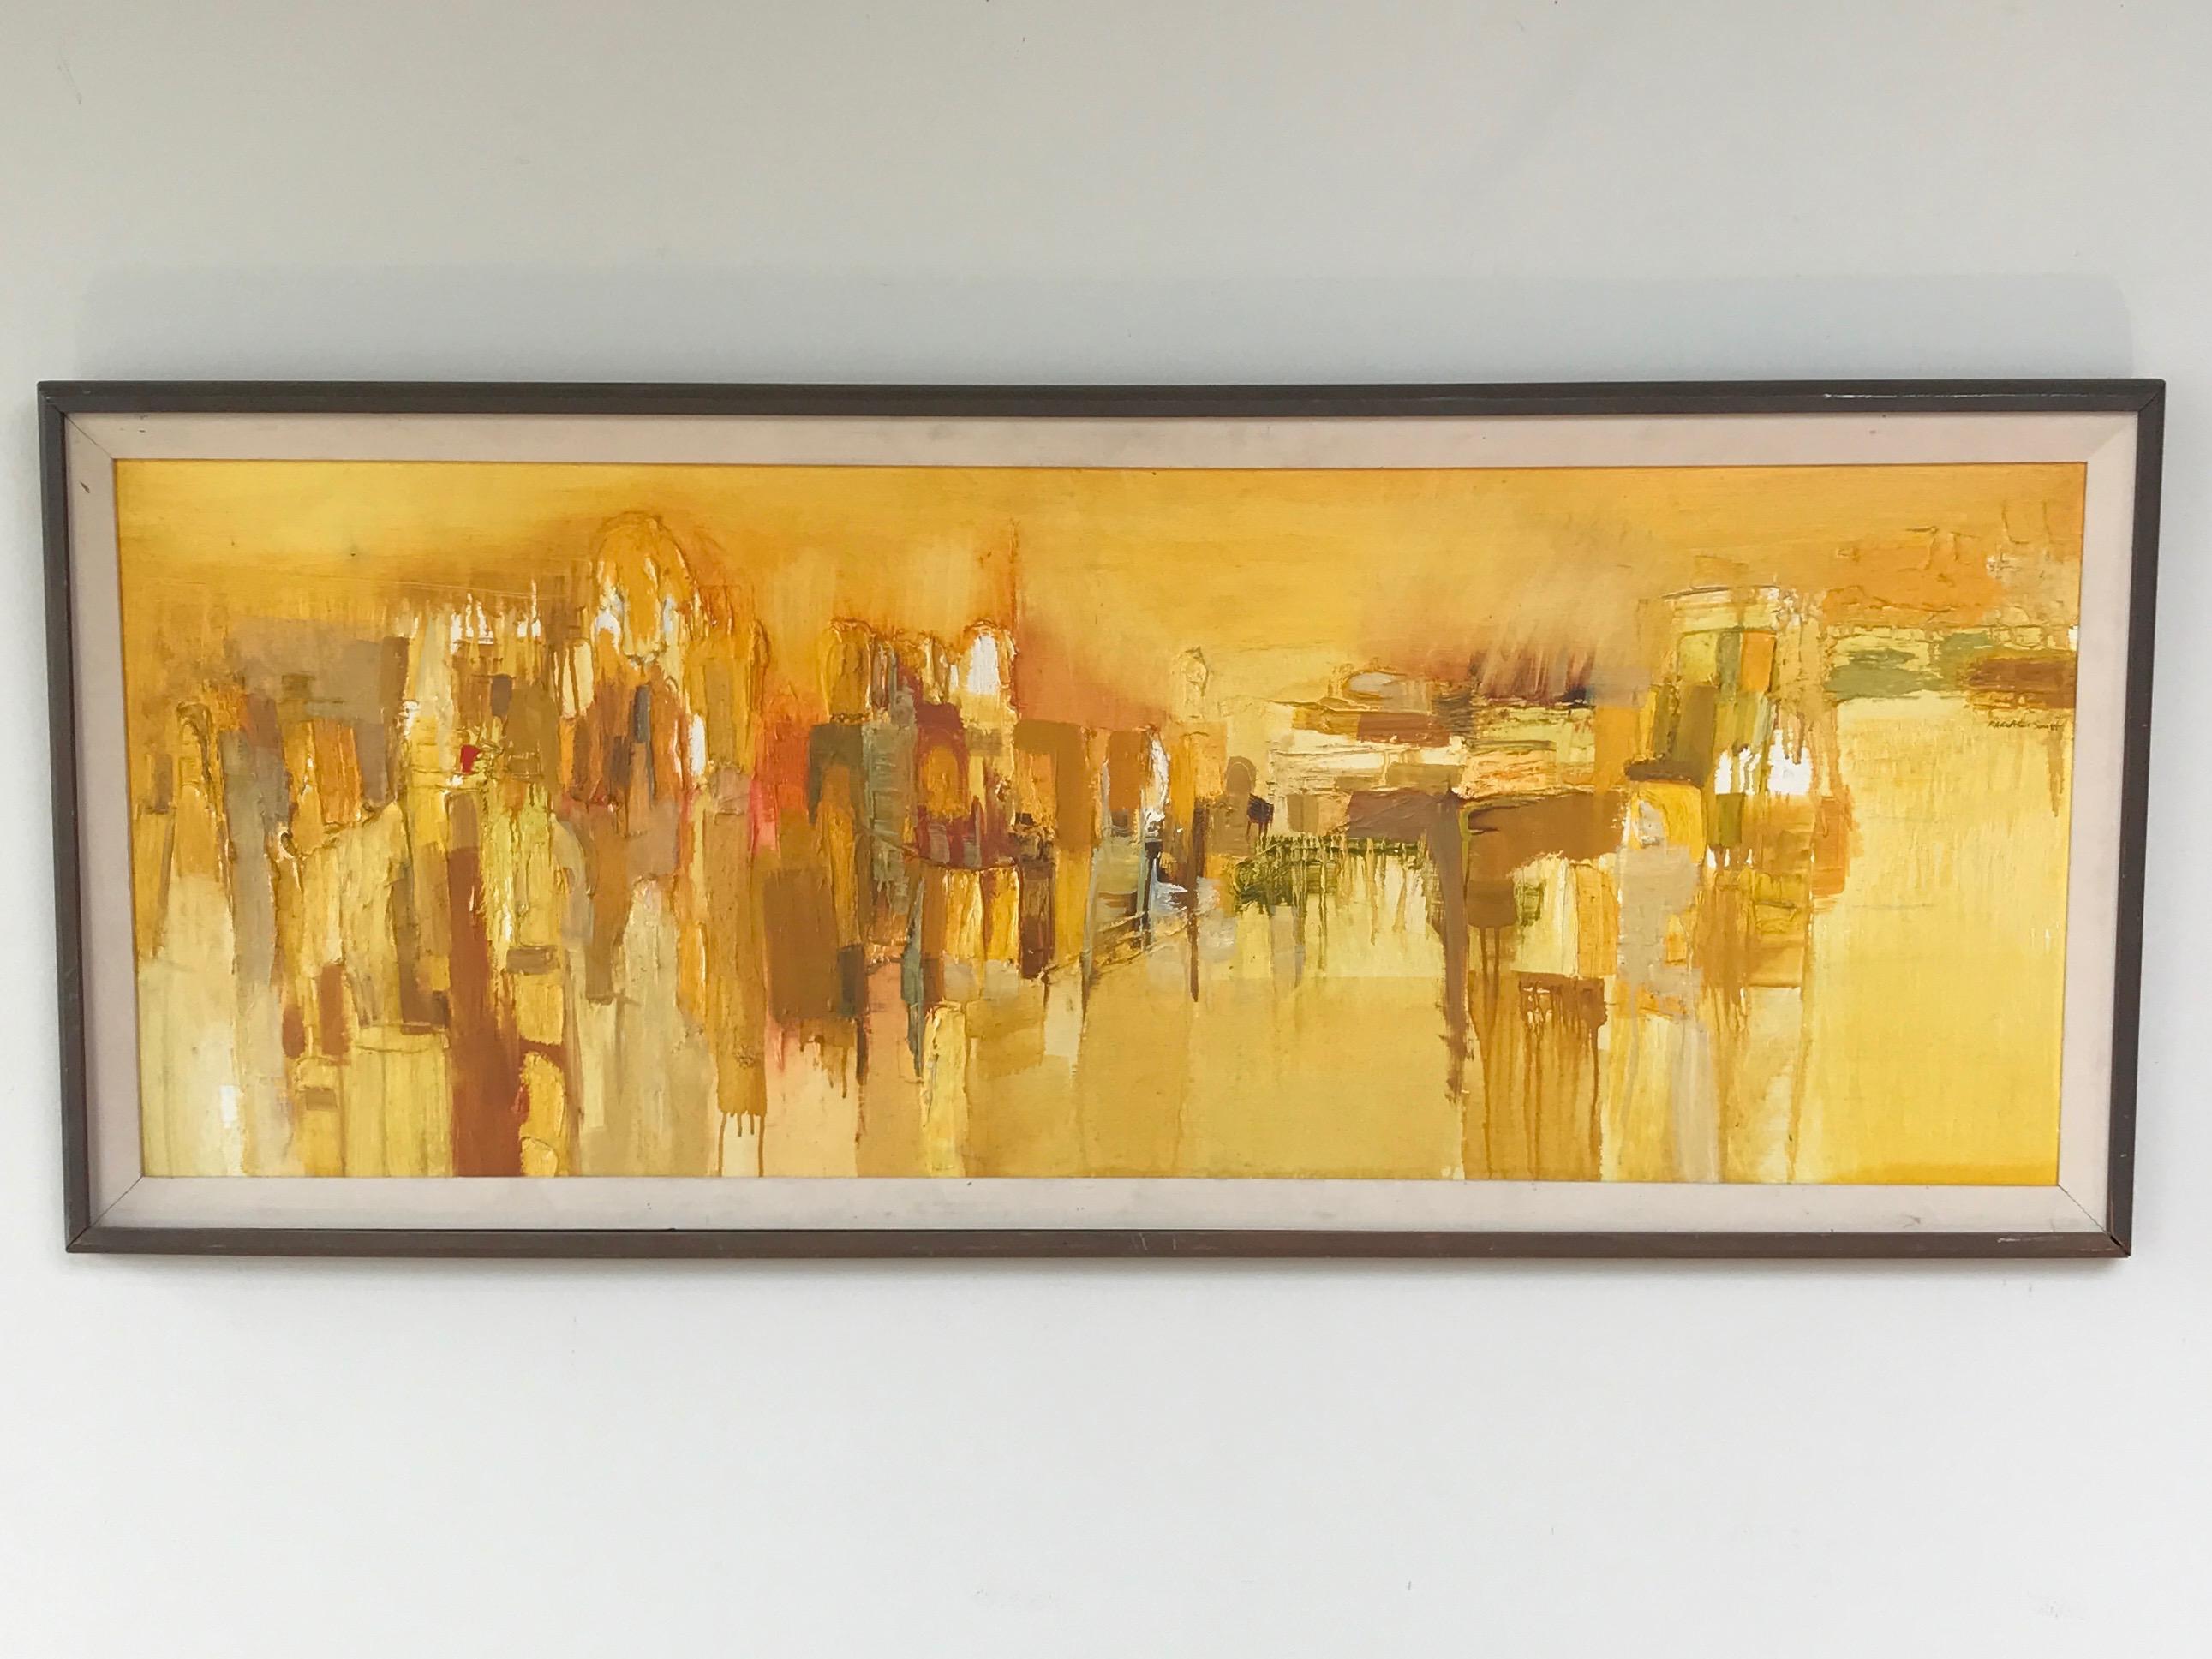 A signed late 1970s/early 1980s large abstract impressionist cityscape oil painting on board titled “Near the Zócalo”, by American artist Margaret Smith.

The Zócalo is the common name of the main square in Mexico City—known formally as Plaza de la